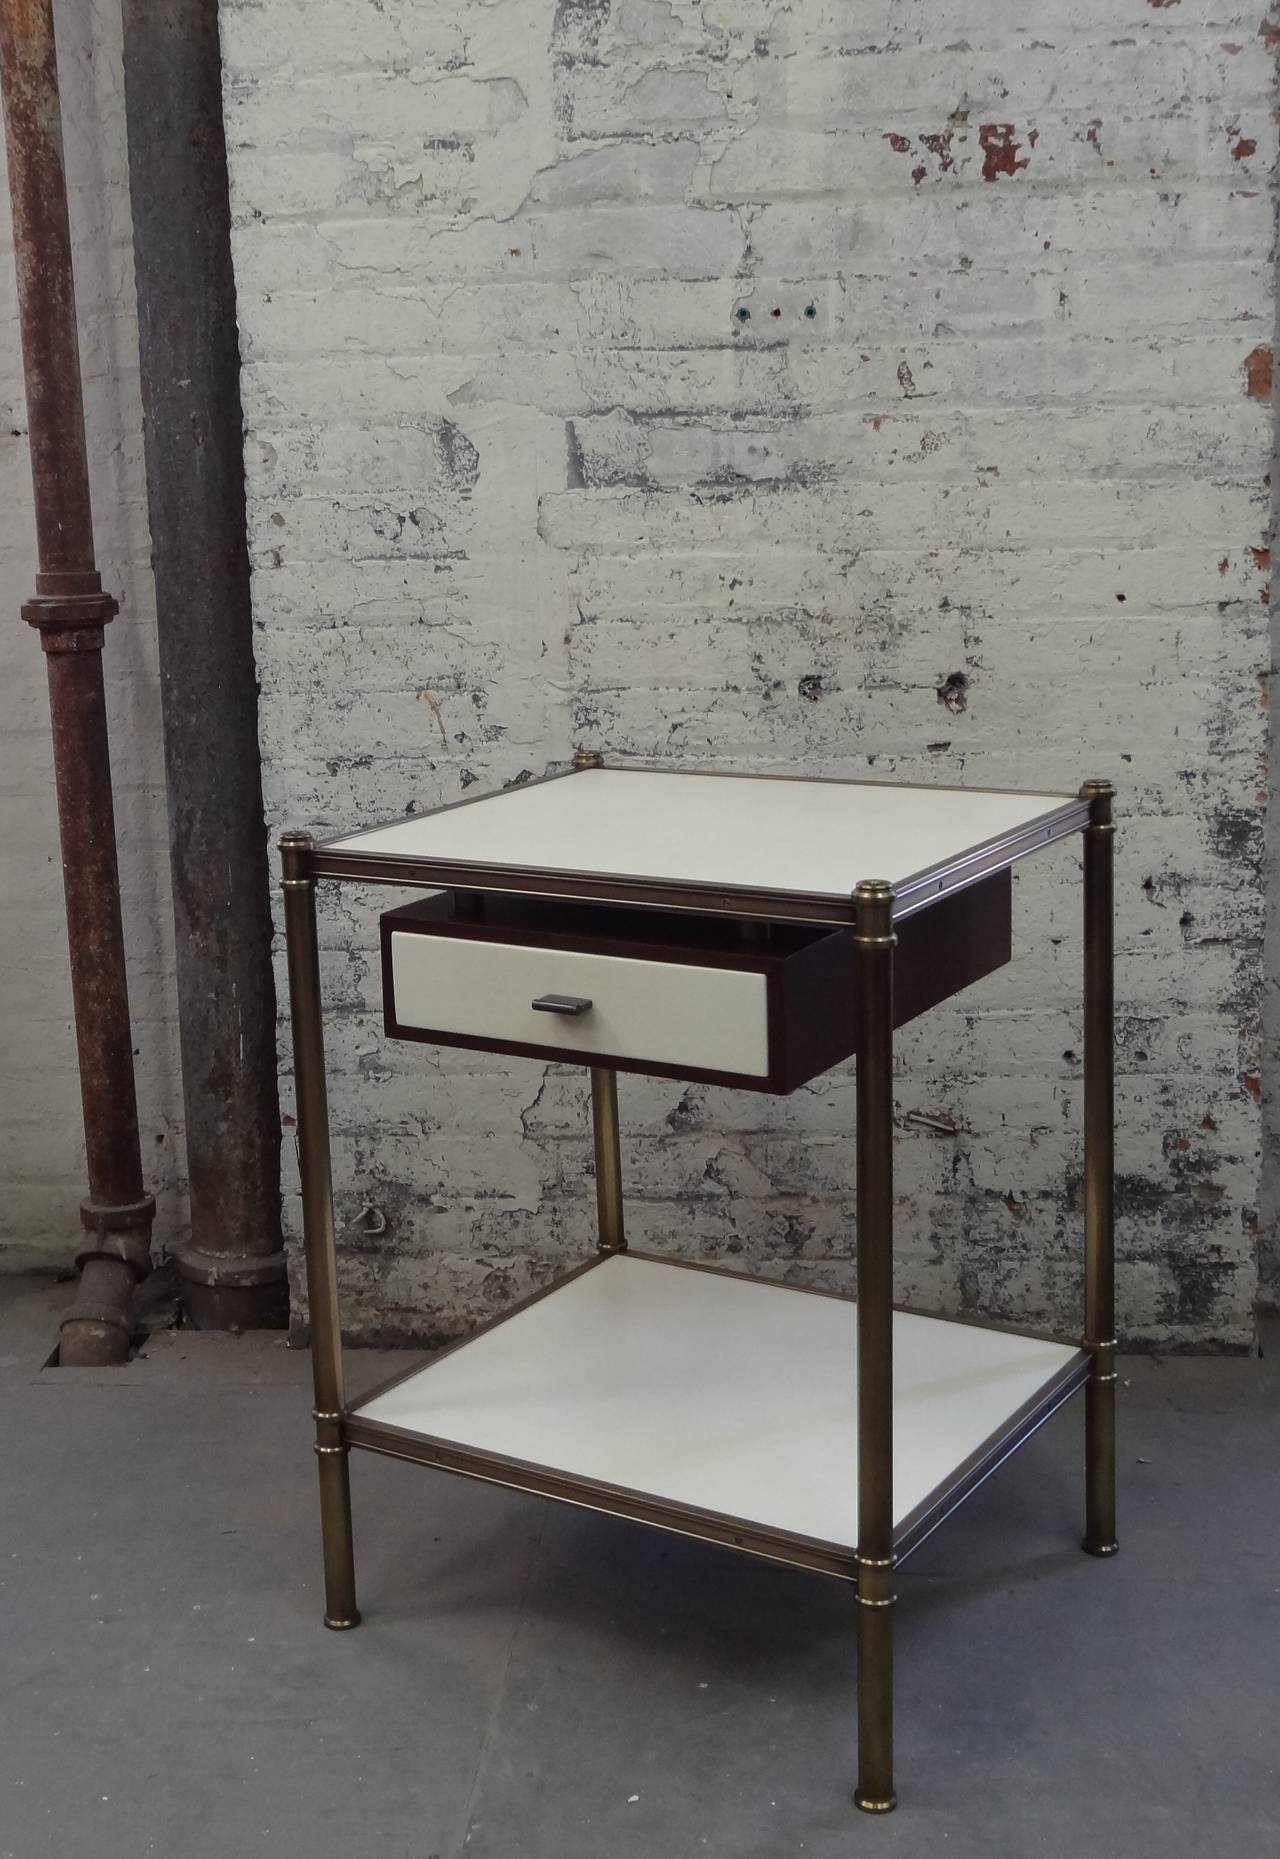 The Cole Porter style side table, two shelves wrapped in parchment with a floating drawer mounted beneath the top shelf, the drawer face also wrapped in parchment, all held in a patinated brass frame with custom brass edge molding. Design inspired